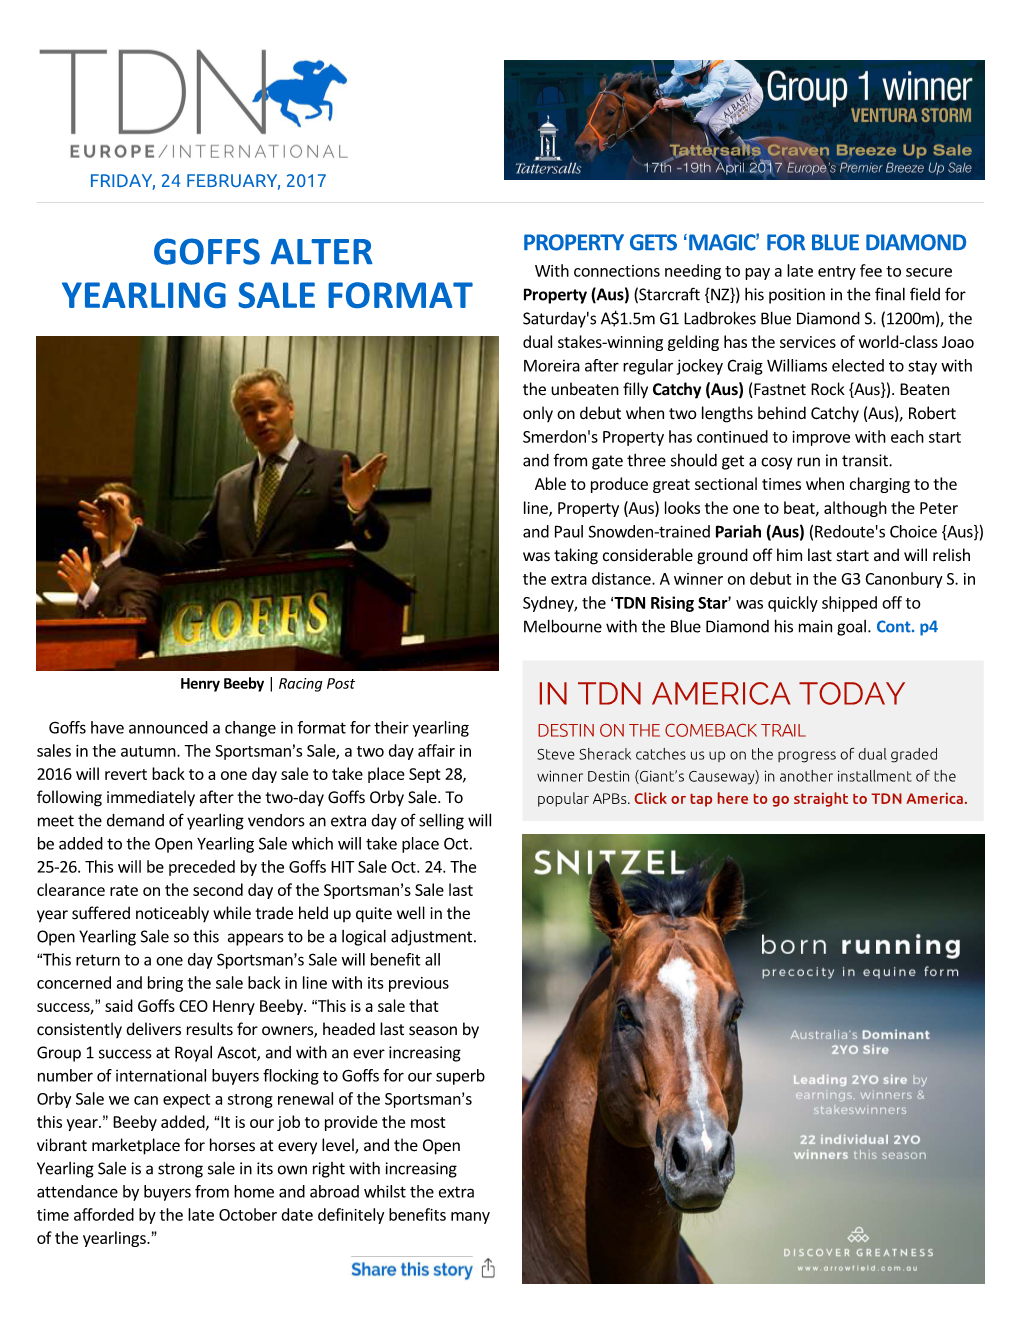 Goffs Alter Yearling Sale Format